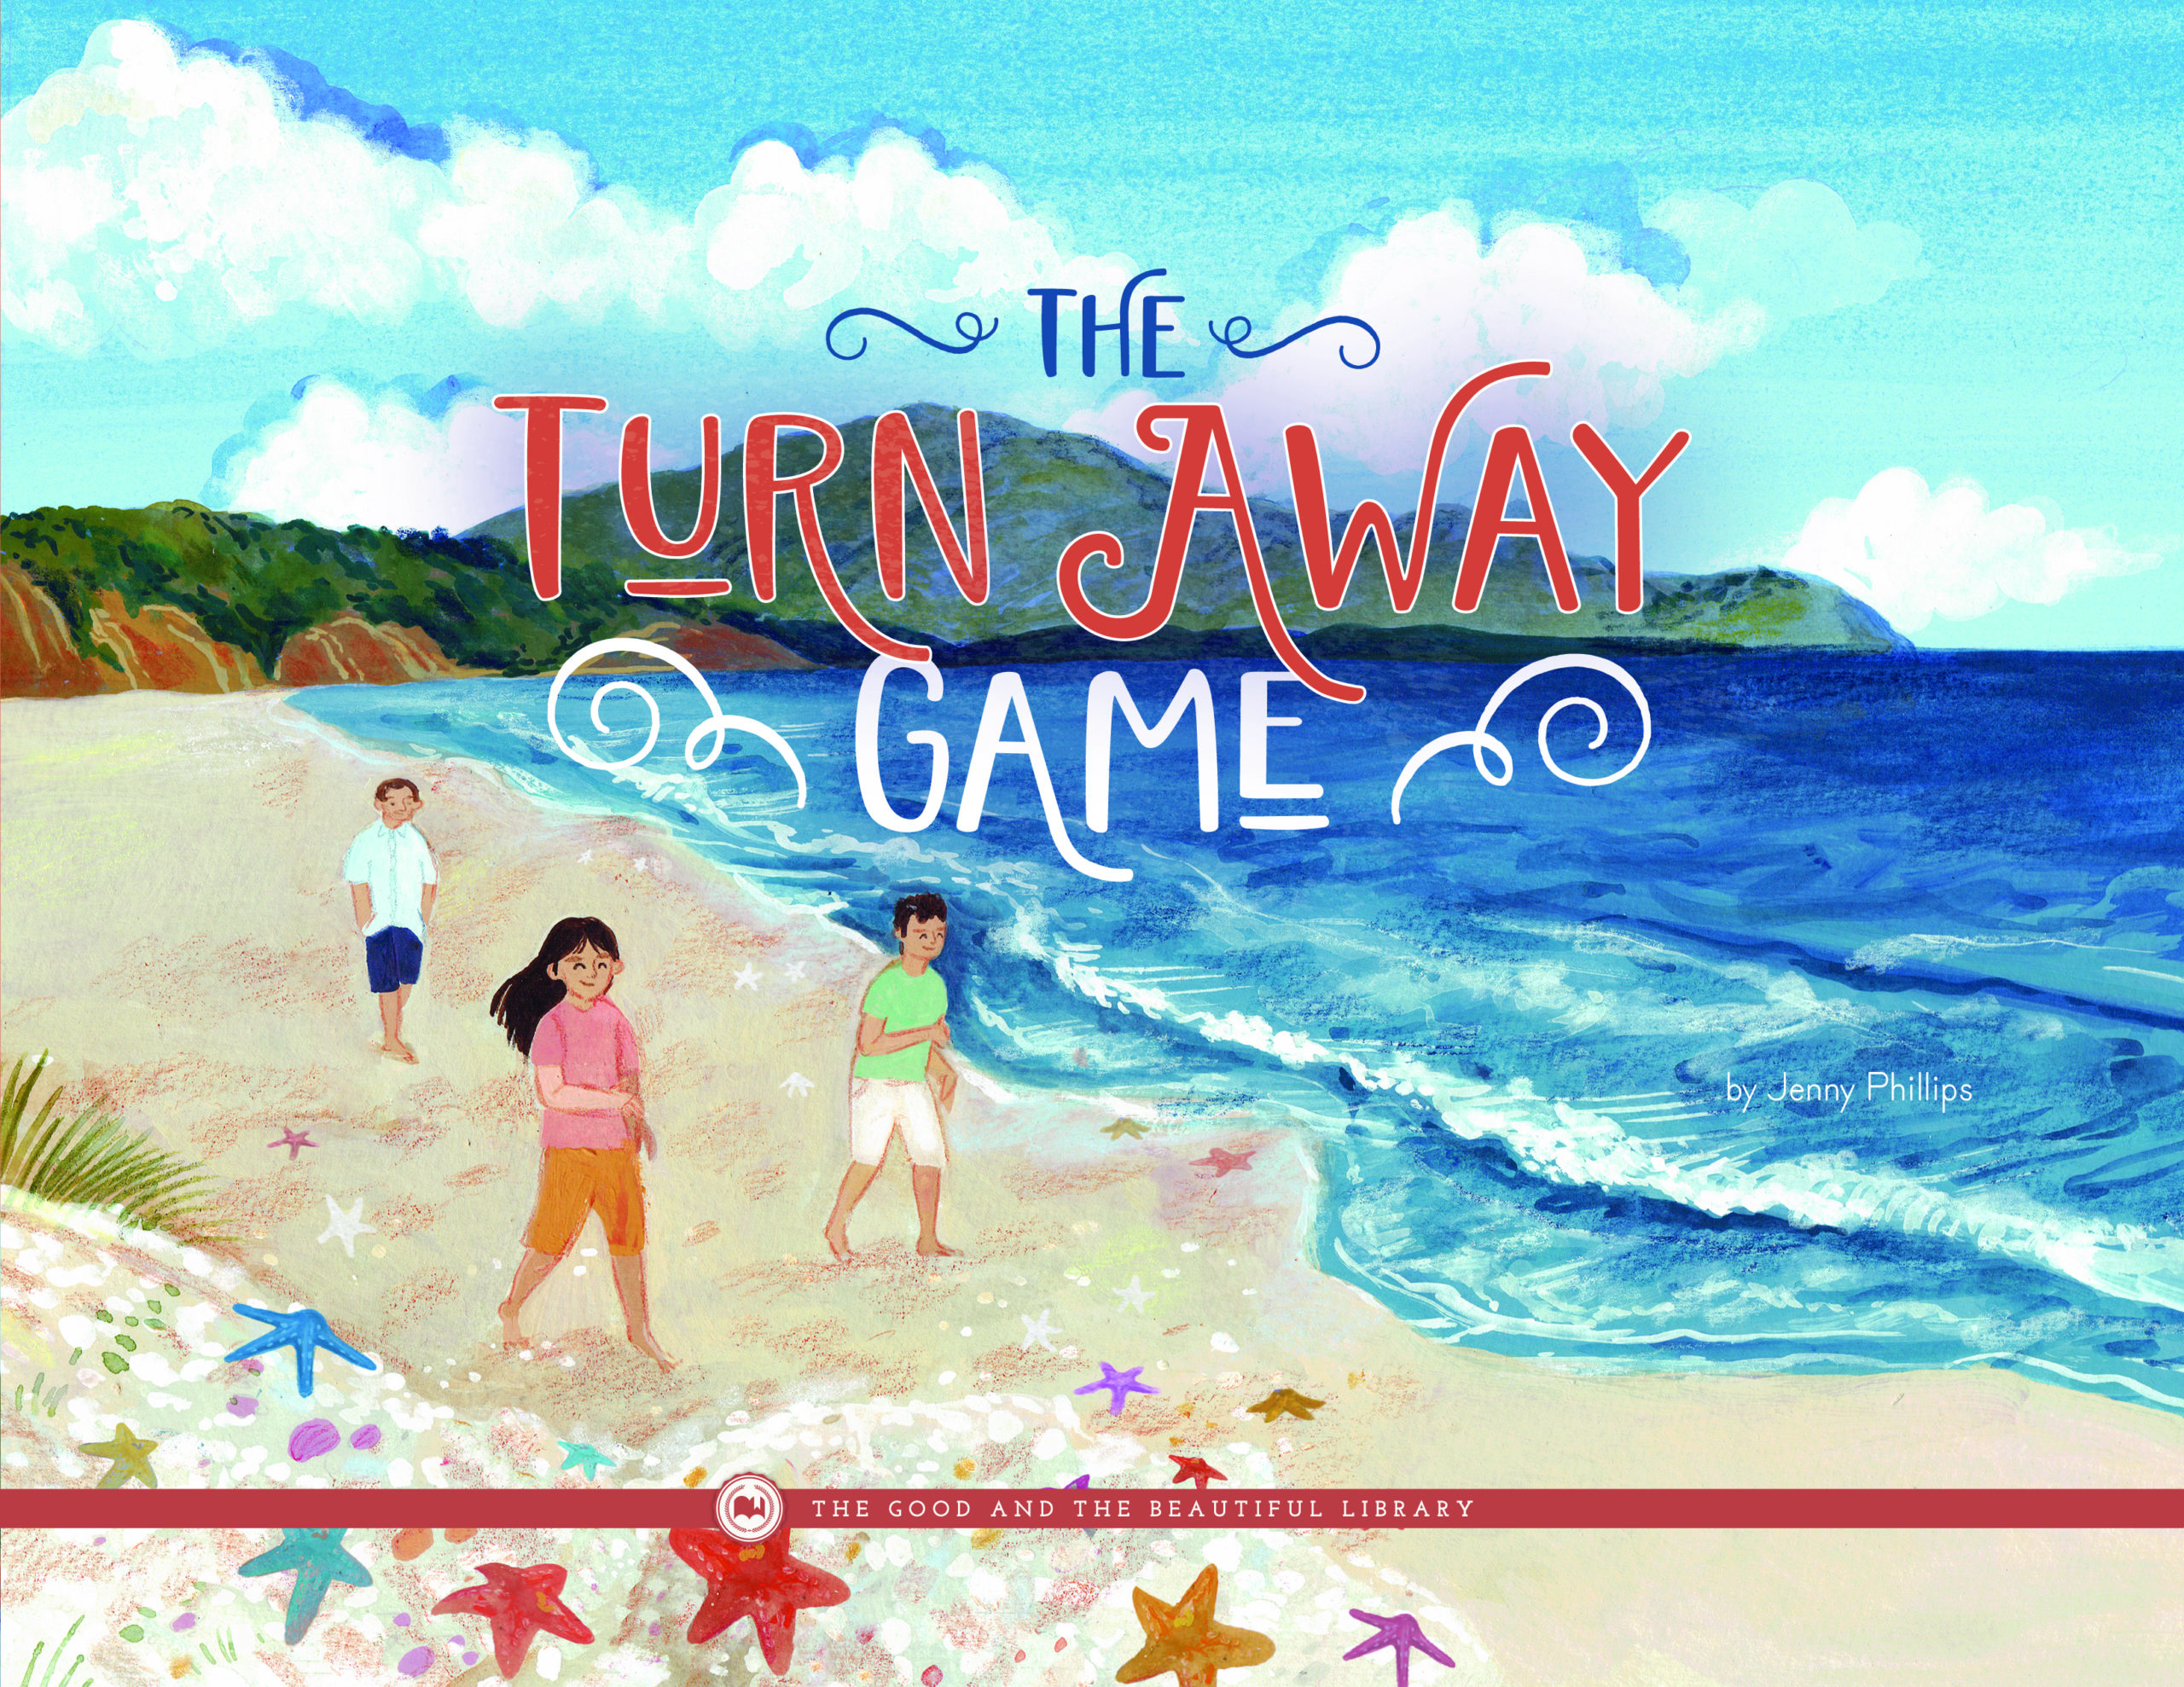 The Turnaway Game